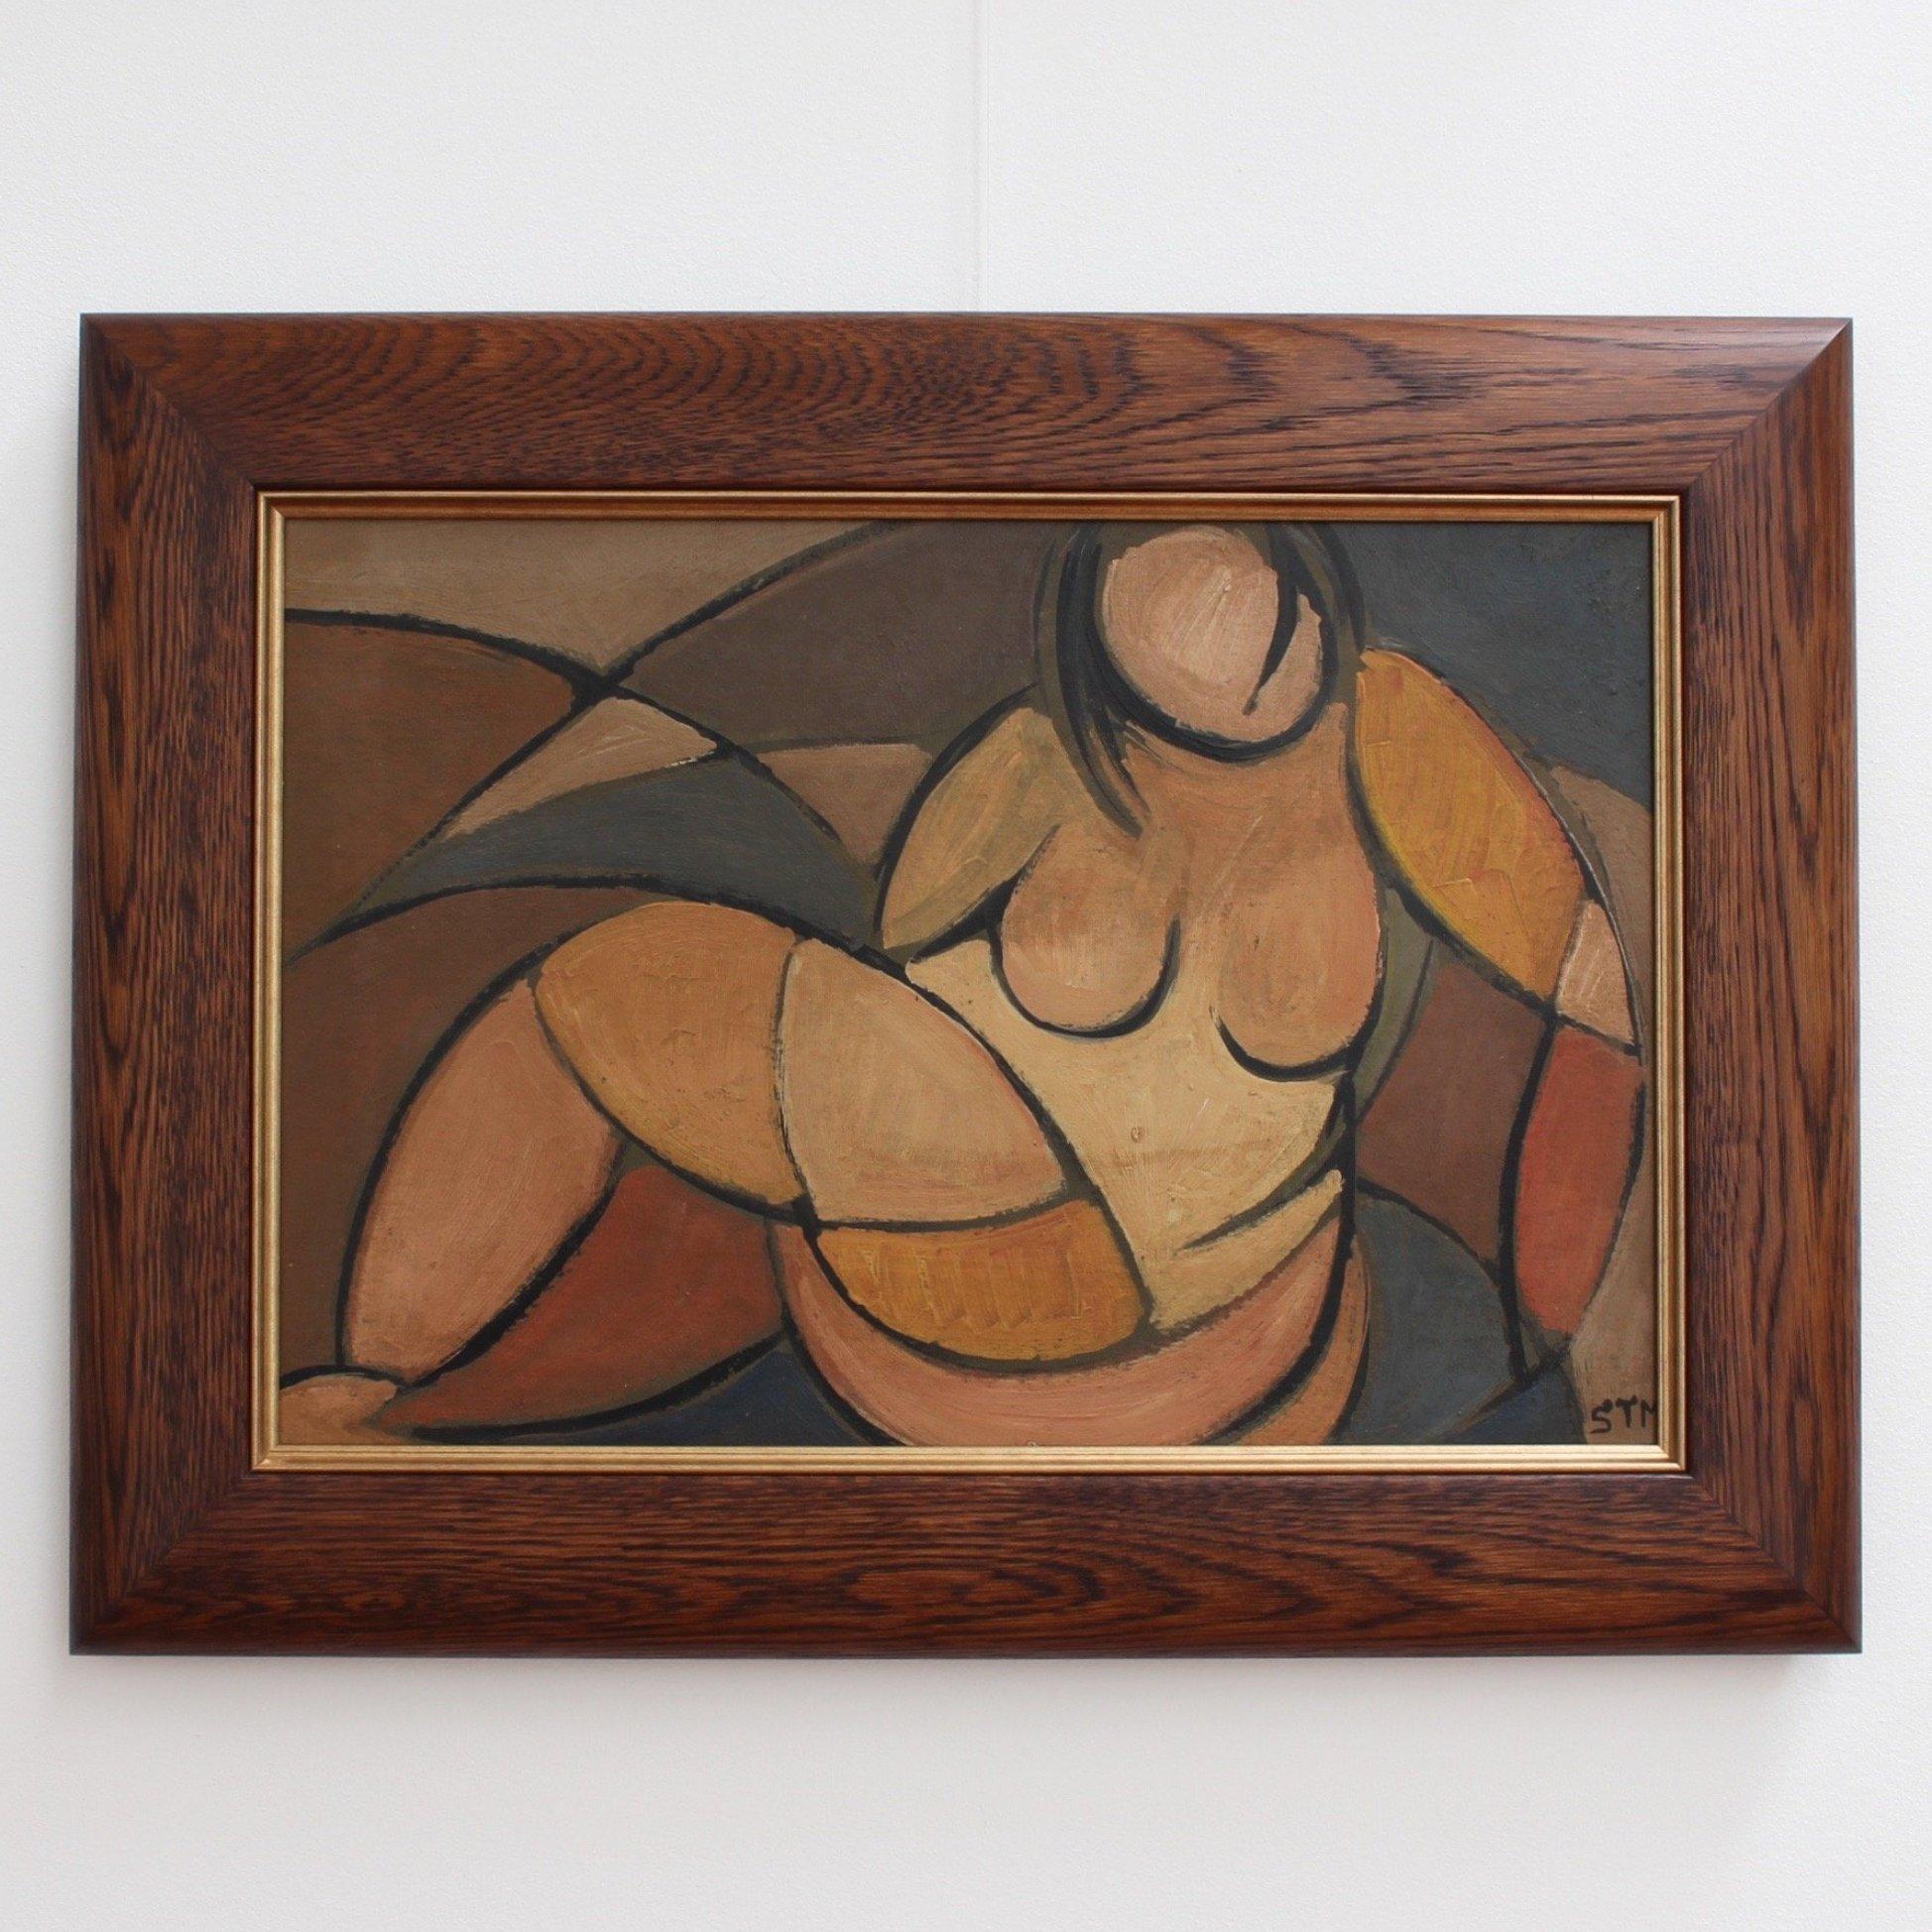 'Portrait of Reclining Woman', oil on board, by artist with the initials STM (c. 1940s - 1960s). A magnificent cubist depiction, this is a portrait of a shapely young woman in muted hues. There are just lines and beautiful colours. Painted primarily